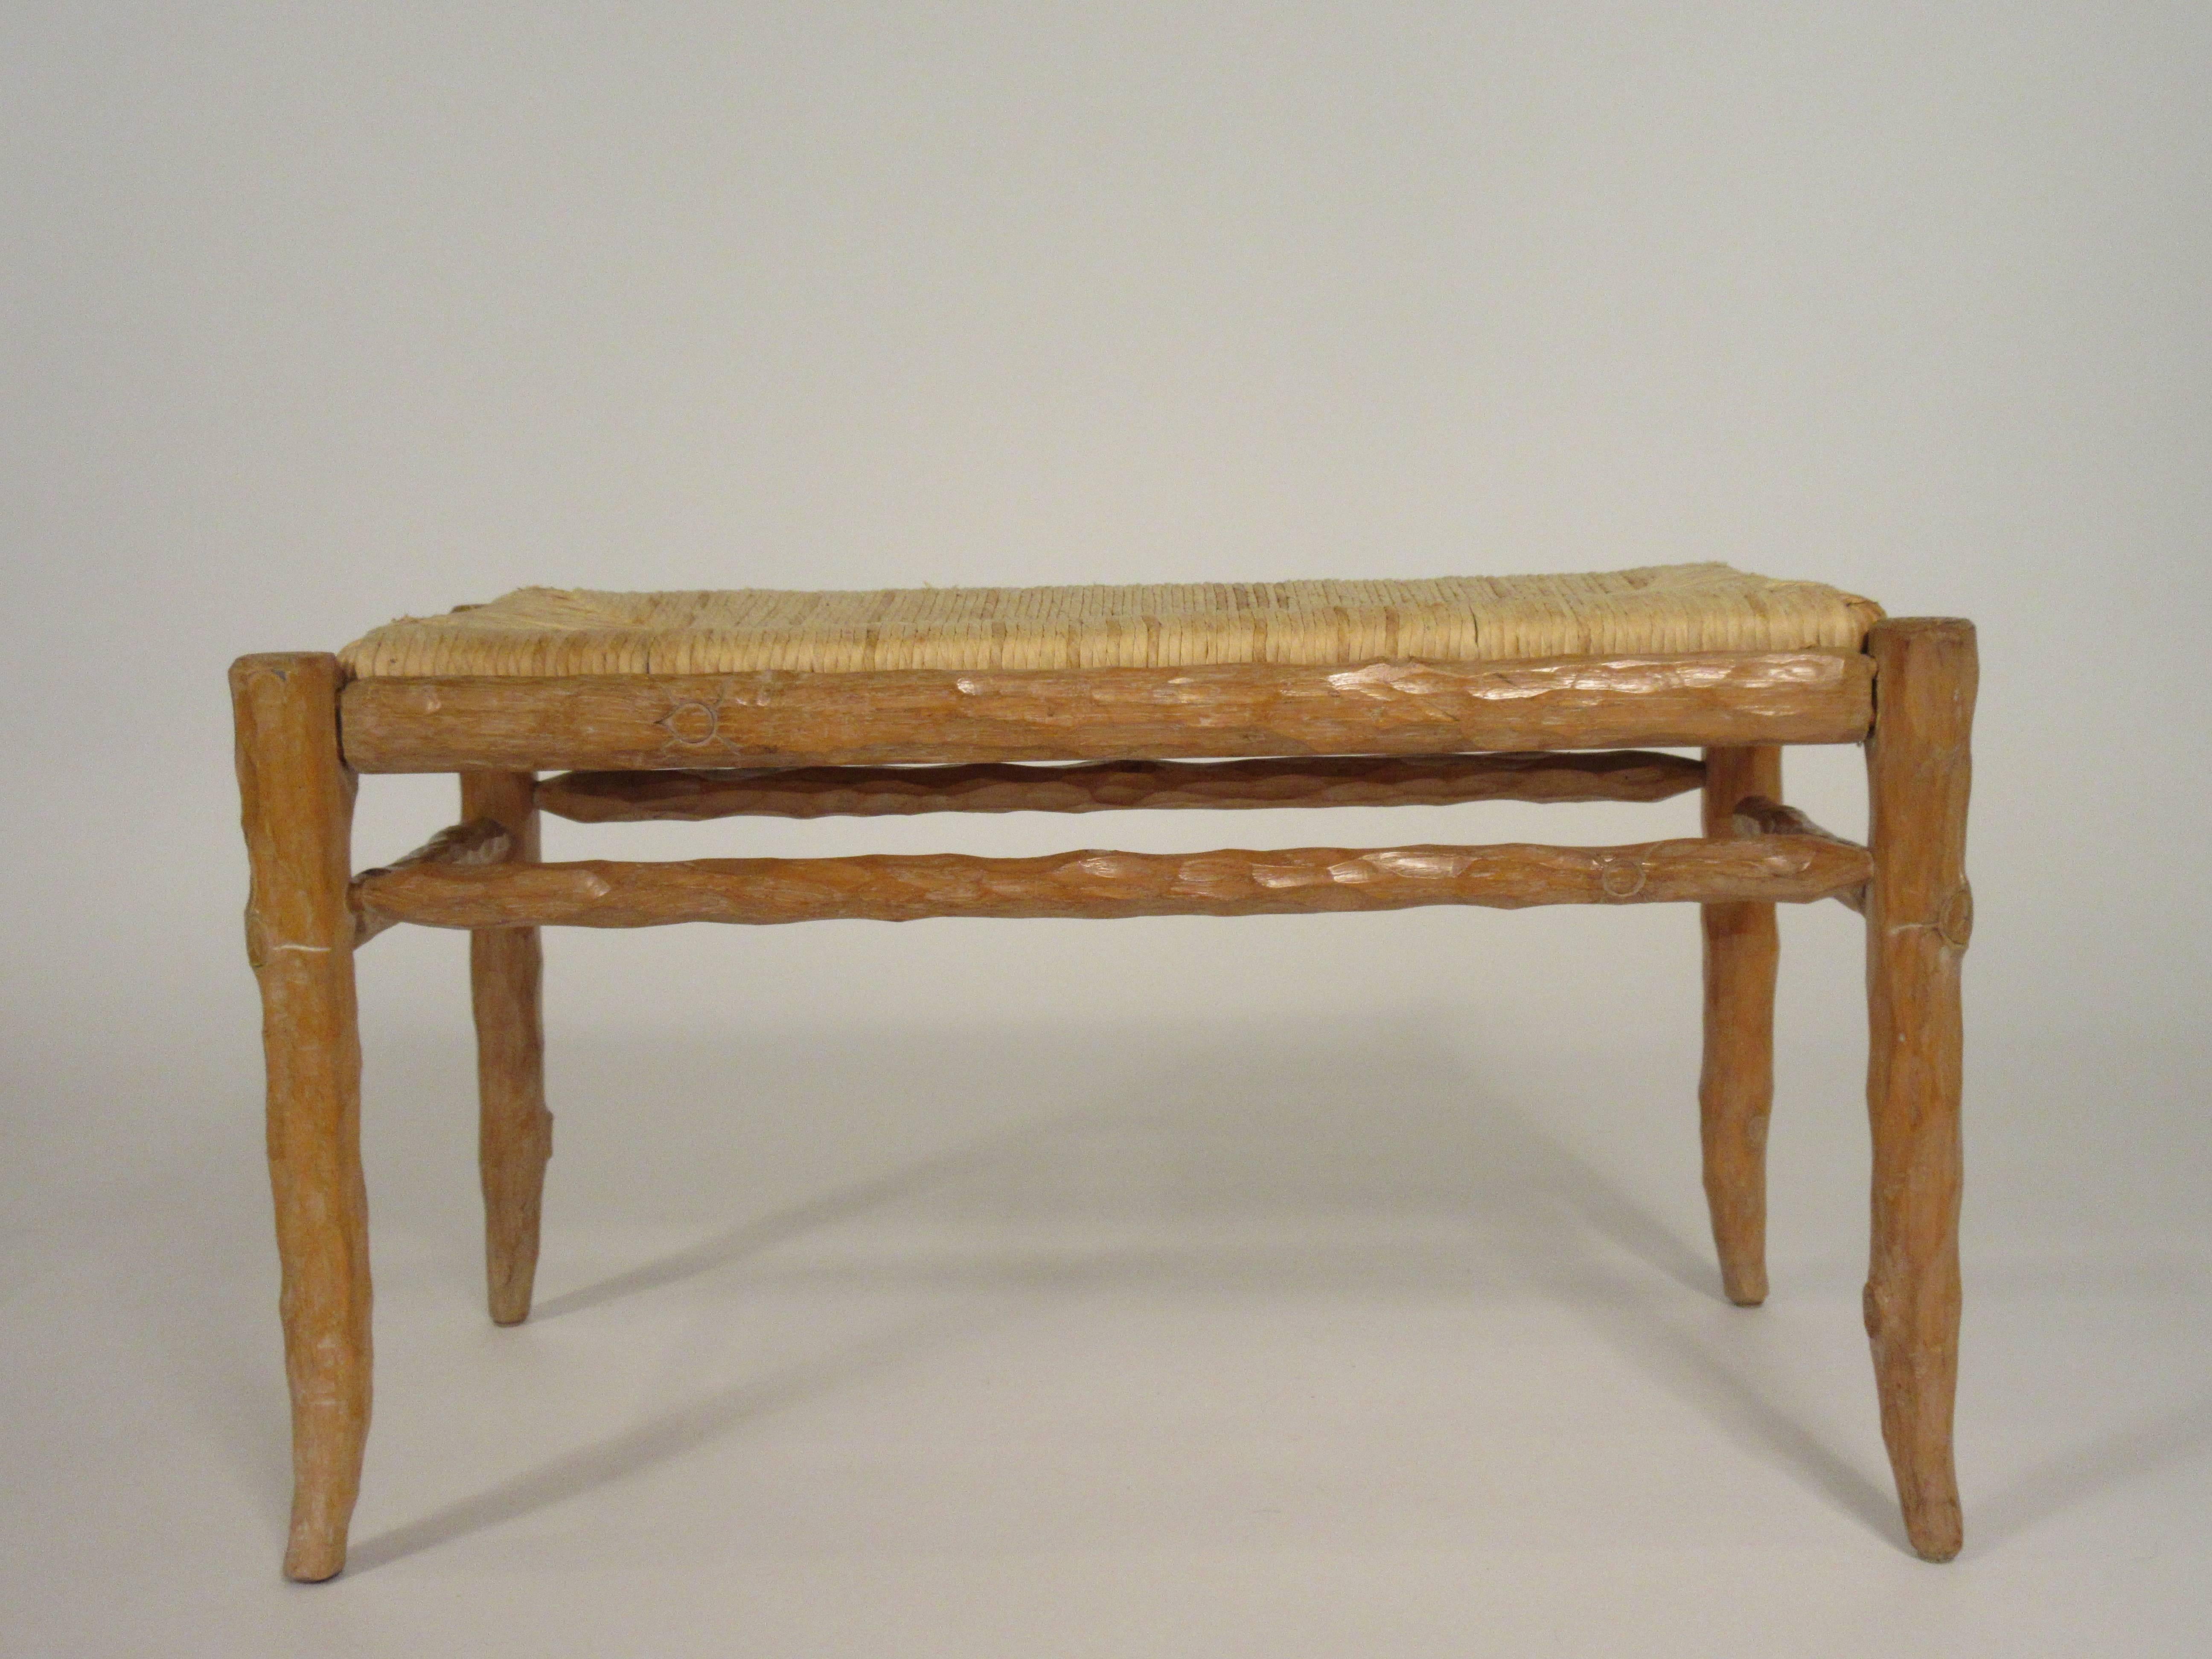 1970s faux bois wood bench with rush seat.